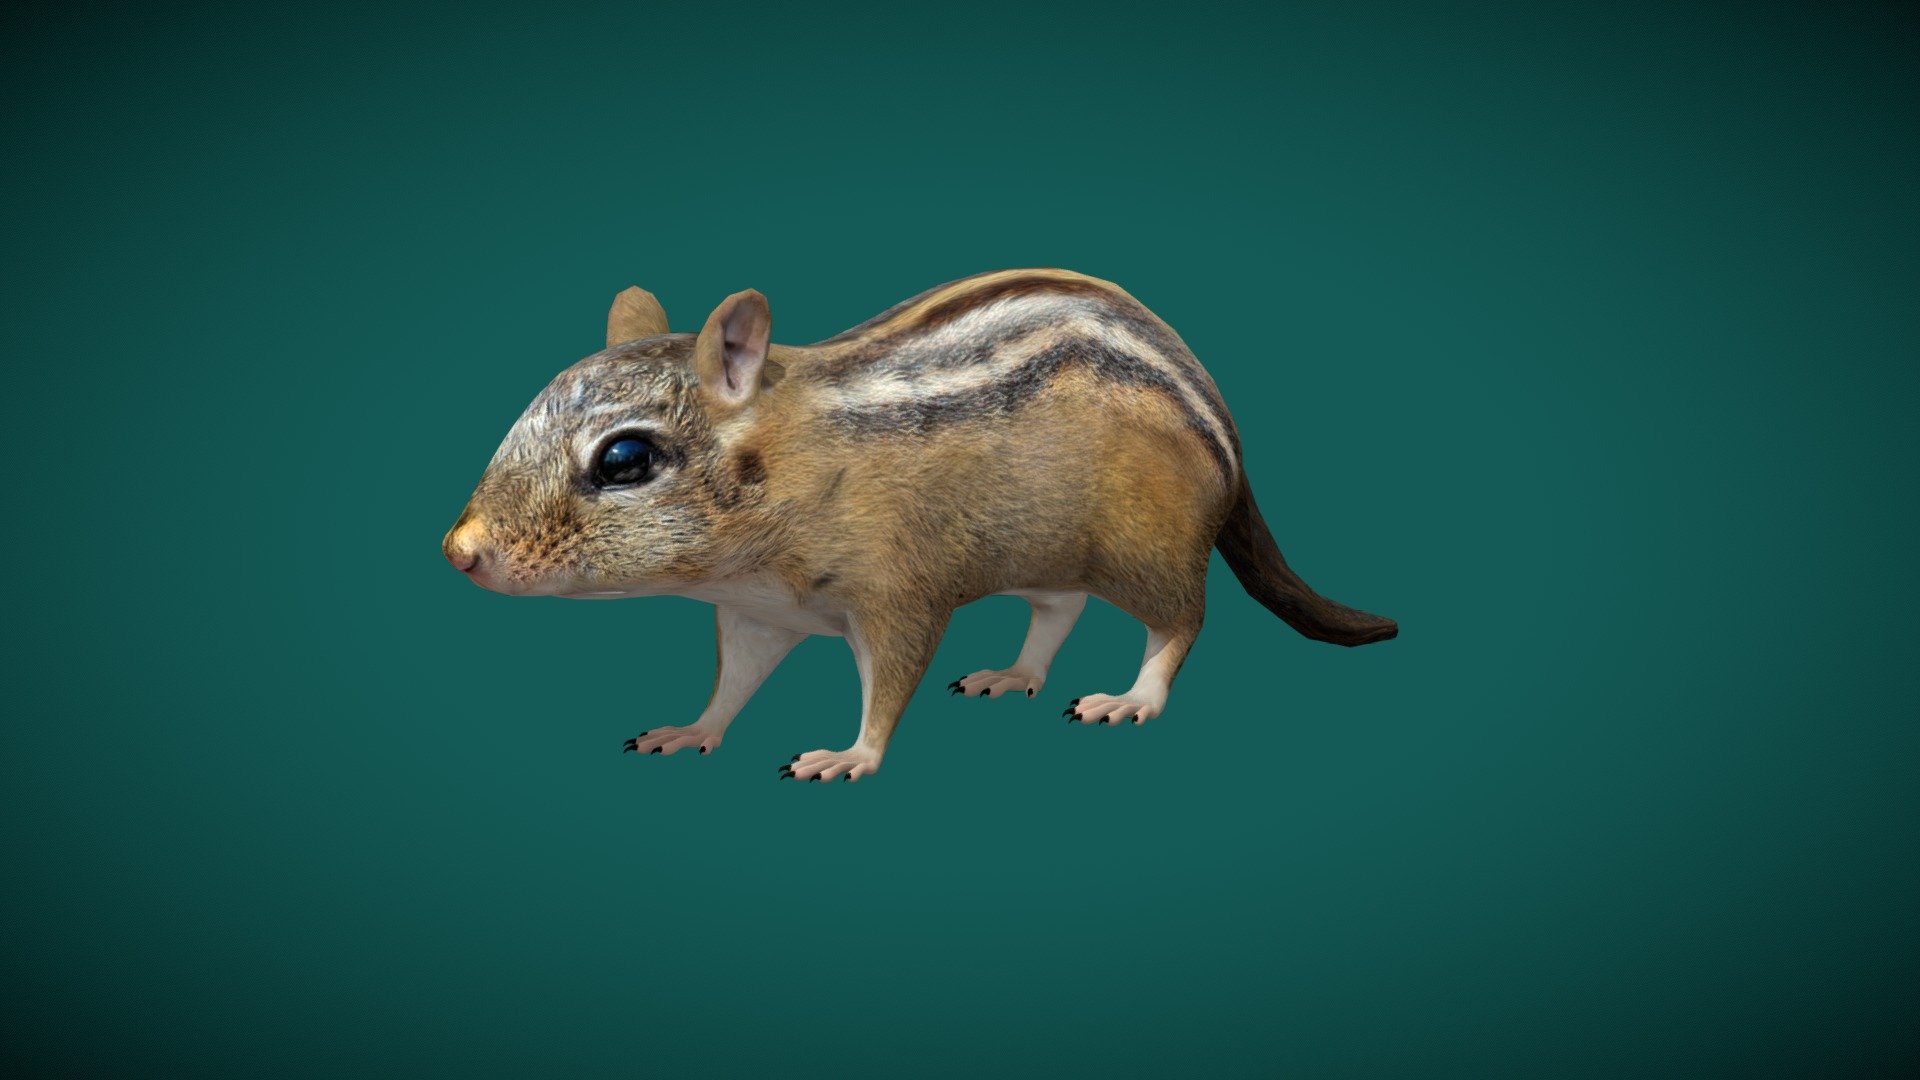 **Chipmunks (Striped Rodents) 

Tamias small, striped rodents Sciuridae Animal ( Mammalia )

1 Draw Calls

GameReady 

11 Animations

4K PBR Textures Material

Unreal FBX

Unity FBX  

Blend File 

USDZ File (AR Ready). Real Scale Dimension

Textures Files

GLB File

Gltf File ( Spark AR, Lens Studio(SnapChat) , Effector(Tiktok) , Spline, Play Canvas ) Compatible

Triangles : 8759

Vertices  : 4398

Faces     : 4499

Edges     : 8892**

Diffuse , Metallic, Roughness , Normal Map ,Specular Map,AO

Chipmunks are small, striped rodents of the family Sciuridae. Chipmunks are found in North America, with the exception of the Siberian chipmunk which is found primarily in Asia. Wikipedia
Lifespan: Eastern chipmunk: 3 years, Siberian chipmunk: 6 – 10 years
Class: Mammalia
Domain: Eukaryota
Family: Sciuridae
Kingdom: Animalia
Order: Rodentia - Chipmunk Tamias (lowpoly) - 3D model by Nyilonelycompany 3d model